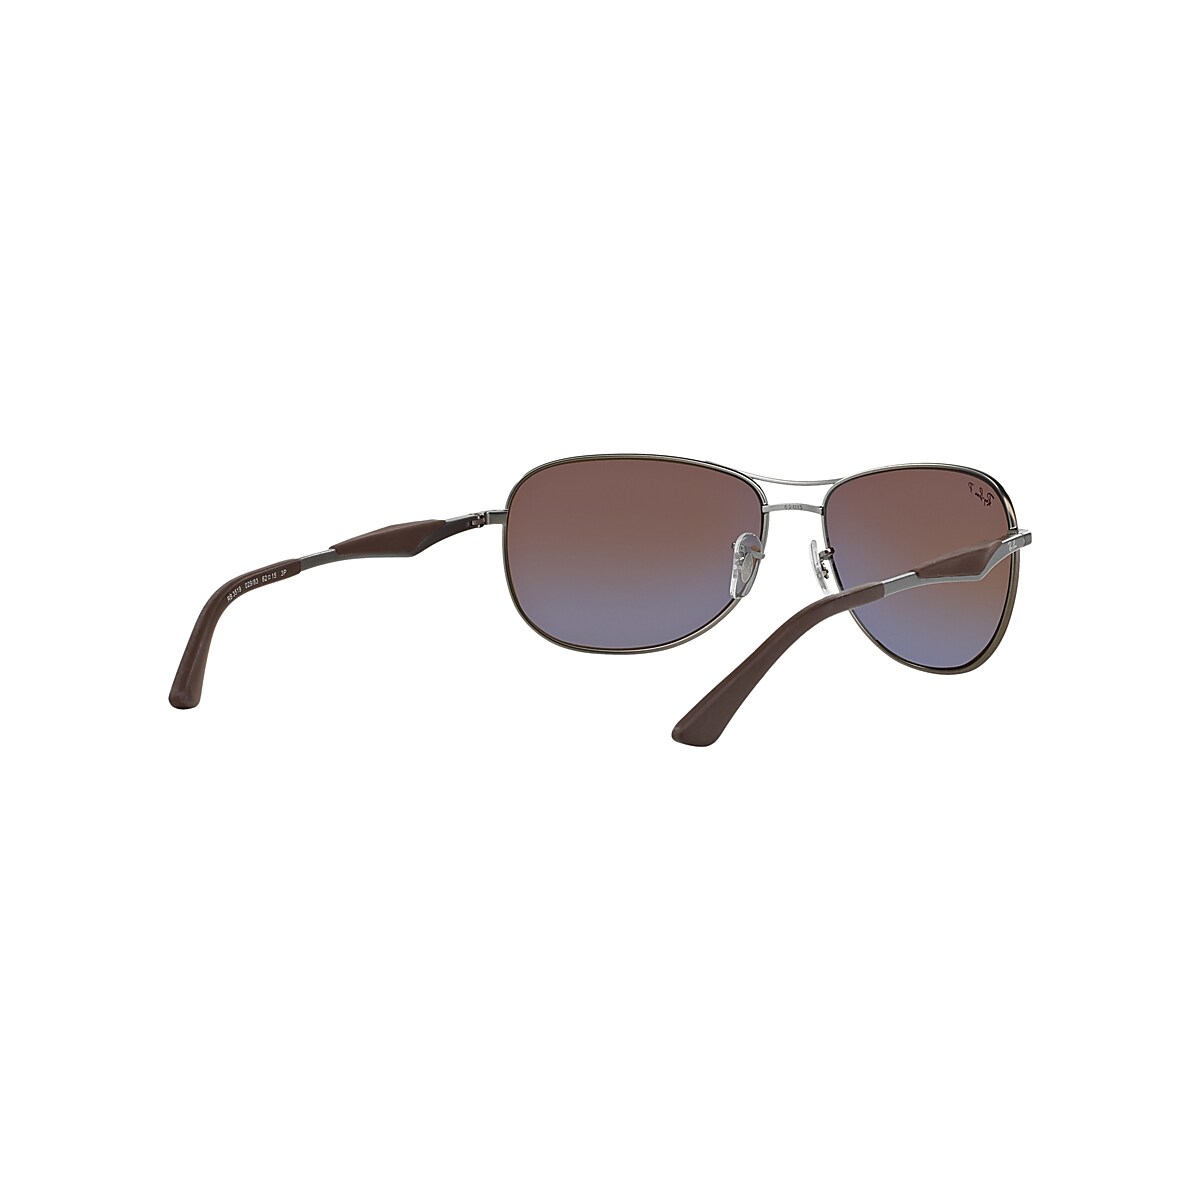 RB3519 Sunglasses in Gunmetal and Brown - RB3519 | Ray-Ban 